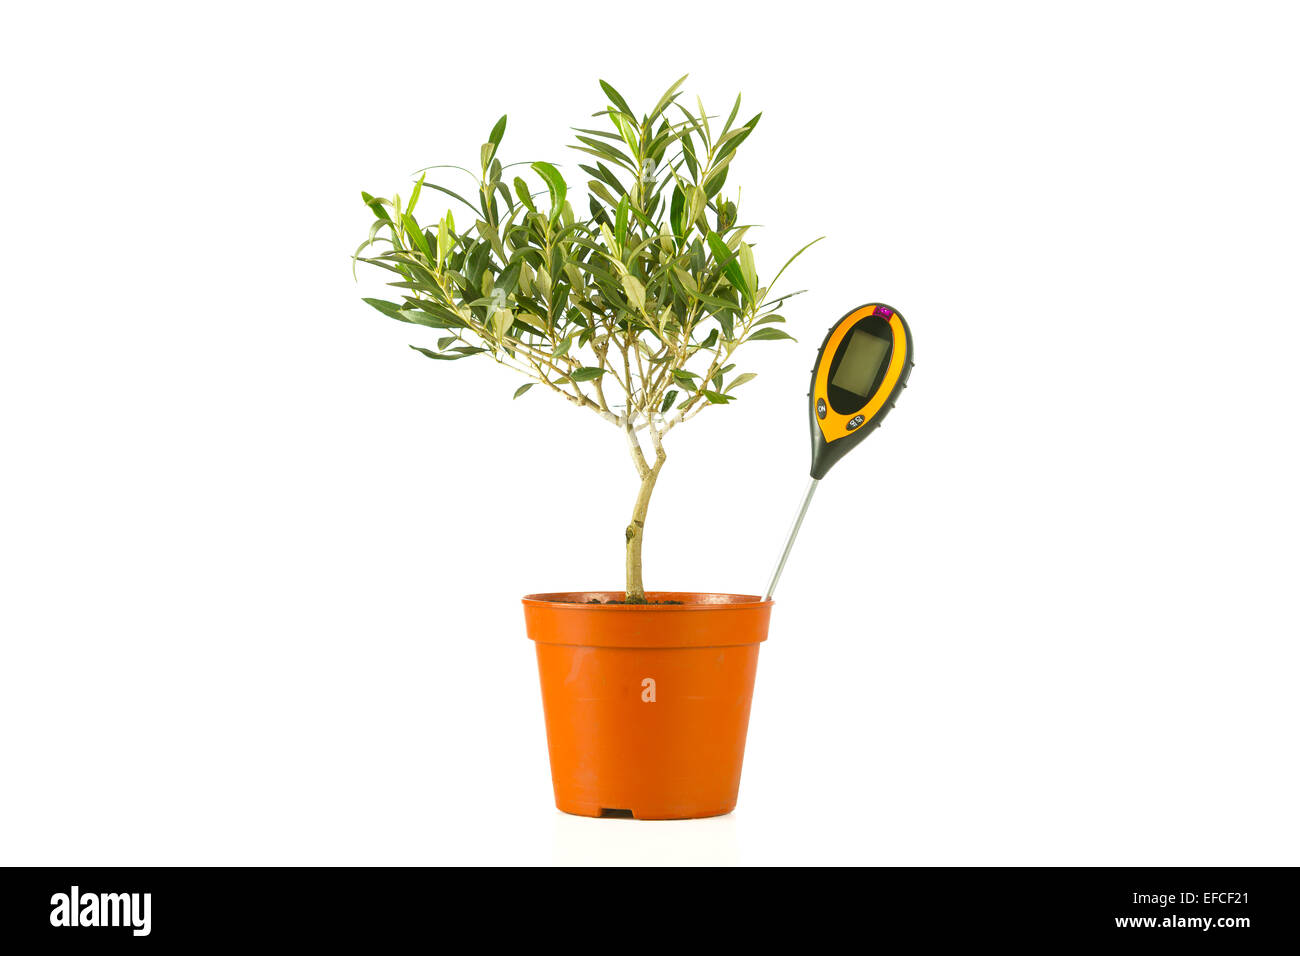 olive tree in a pot with a moisture meter Stock Photo